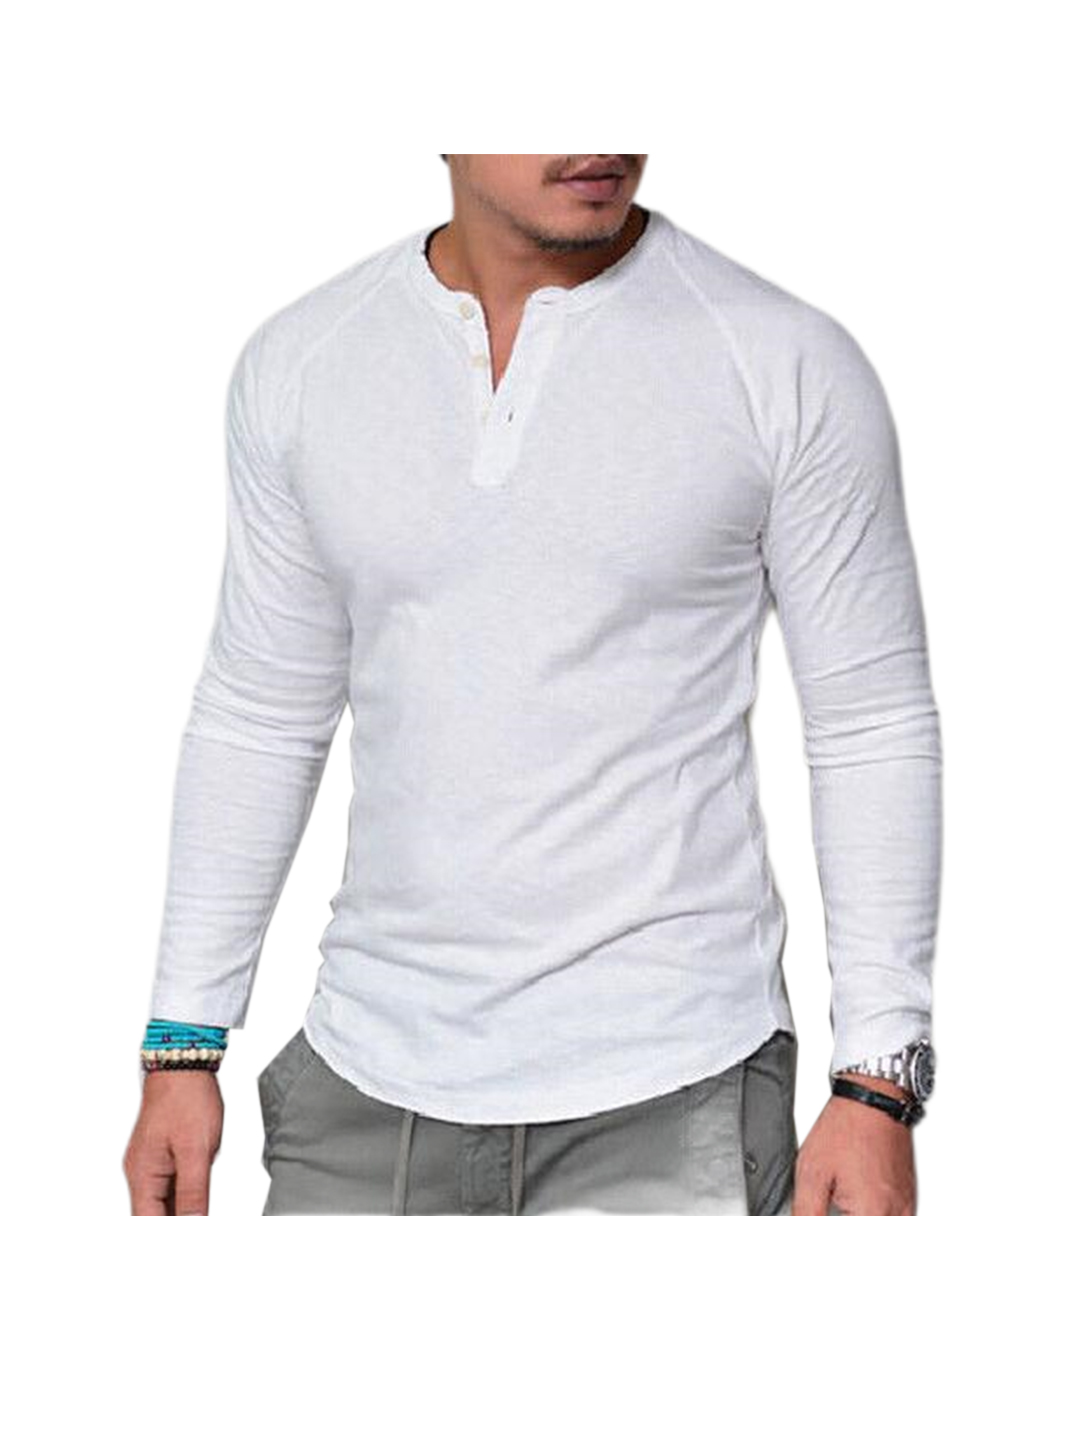 Men's Rogers Solid Color Casual Henley  Long Sleeve T-shirt-poisonstreetwear.com